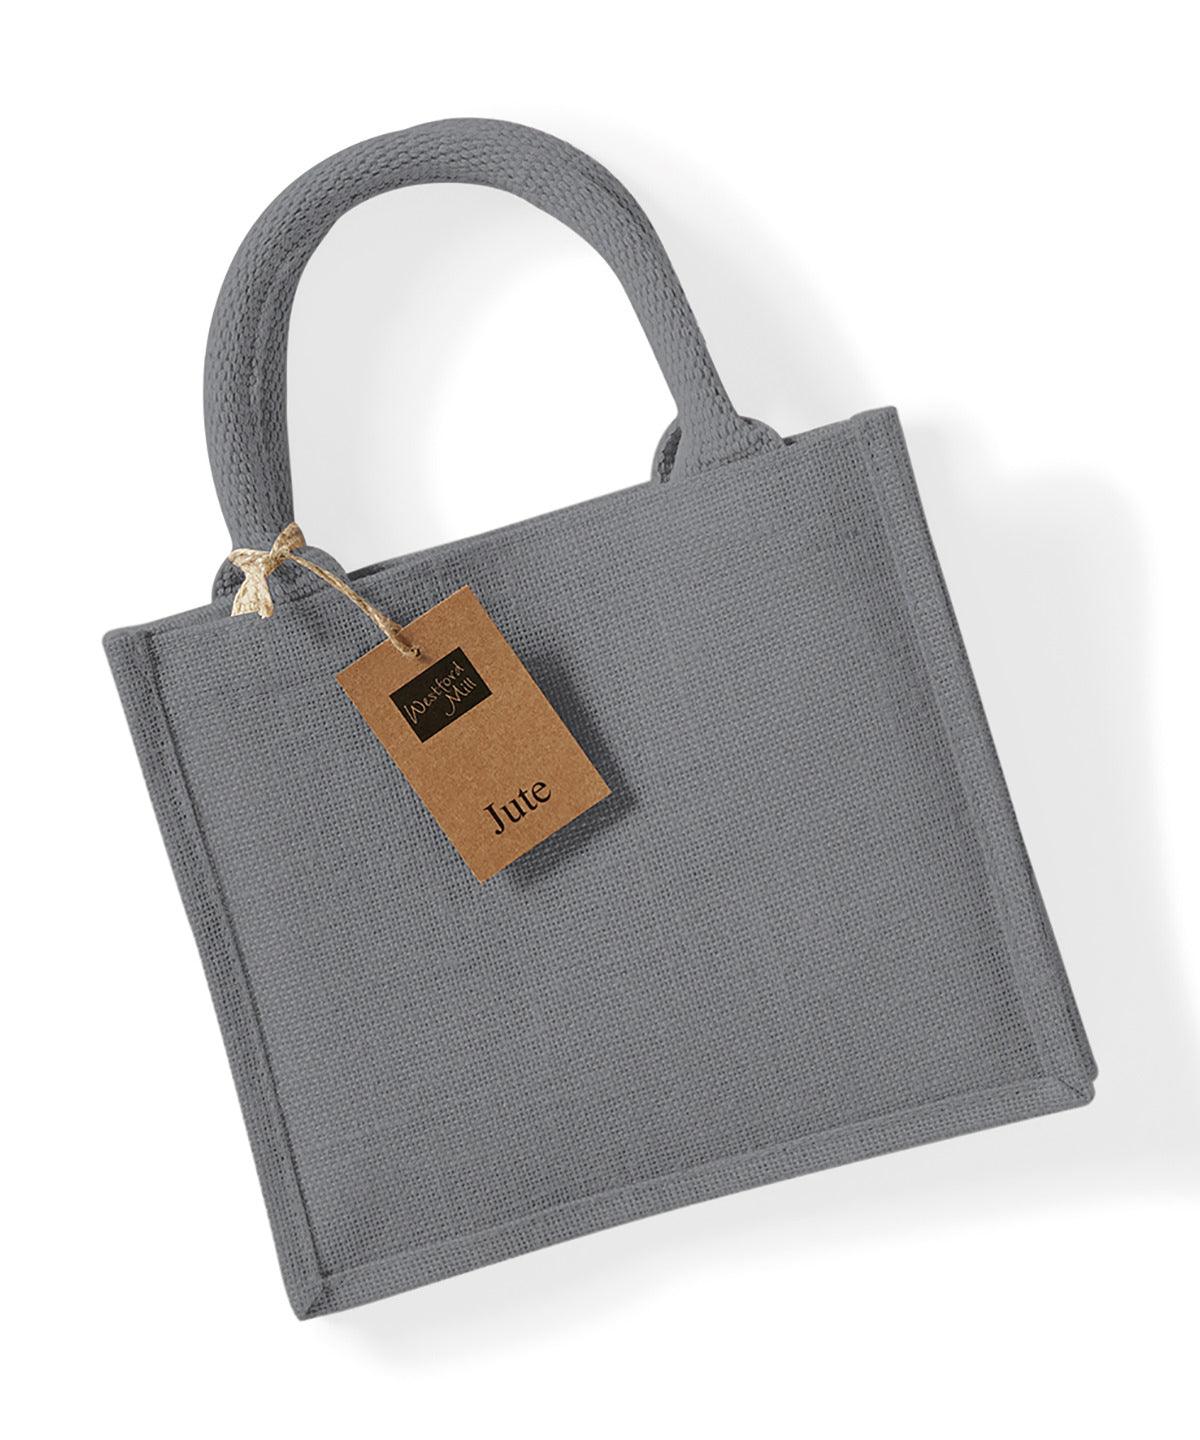 Graphite Grey/Graphite Grey - Jute mini gift bag Bags Westford Mill Bags & Luggage Schoolwear Centres